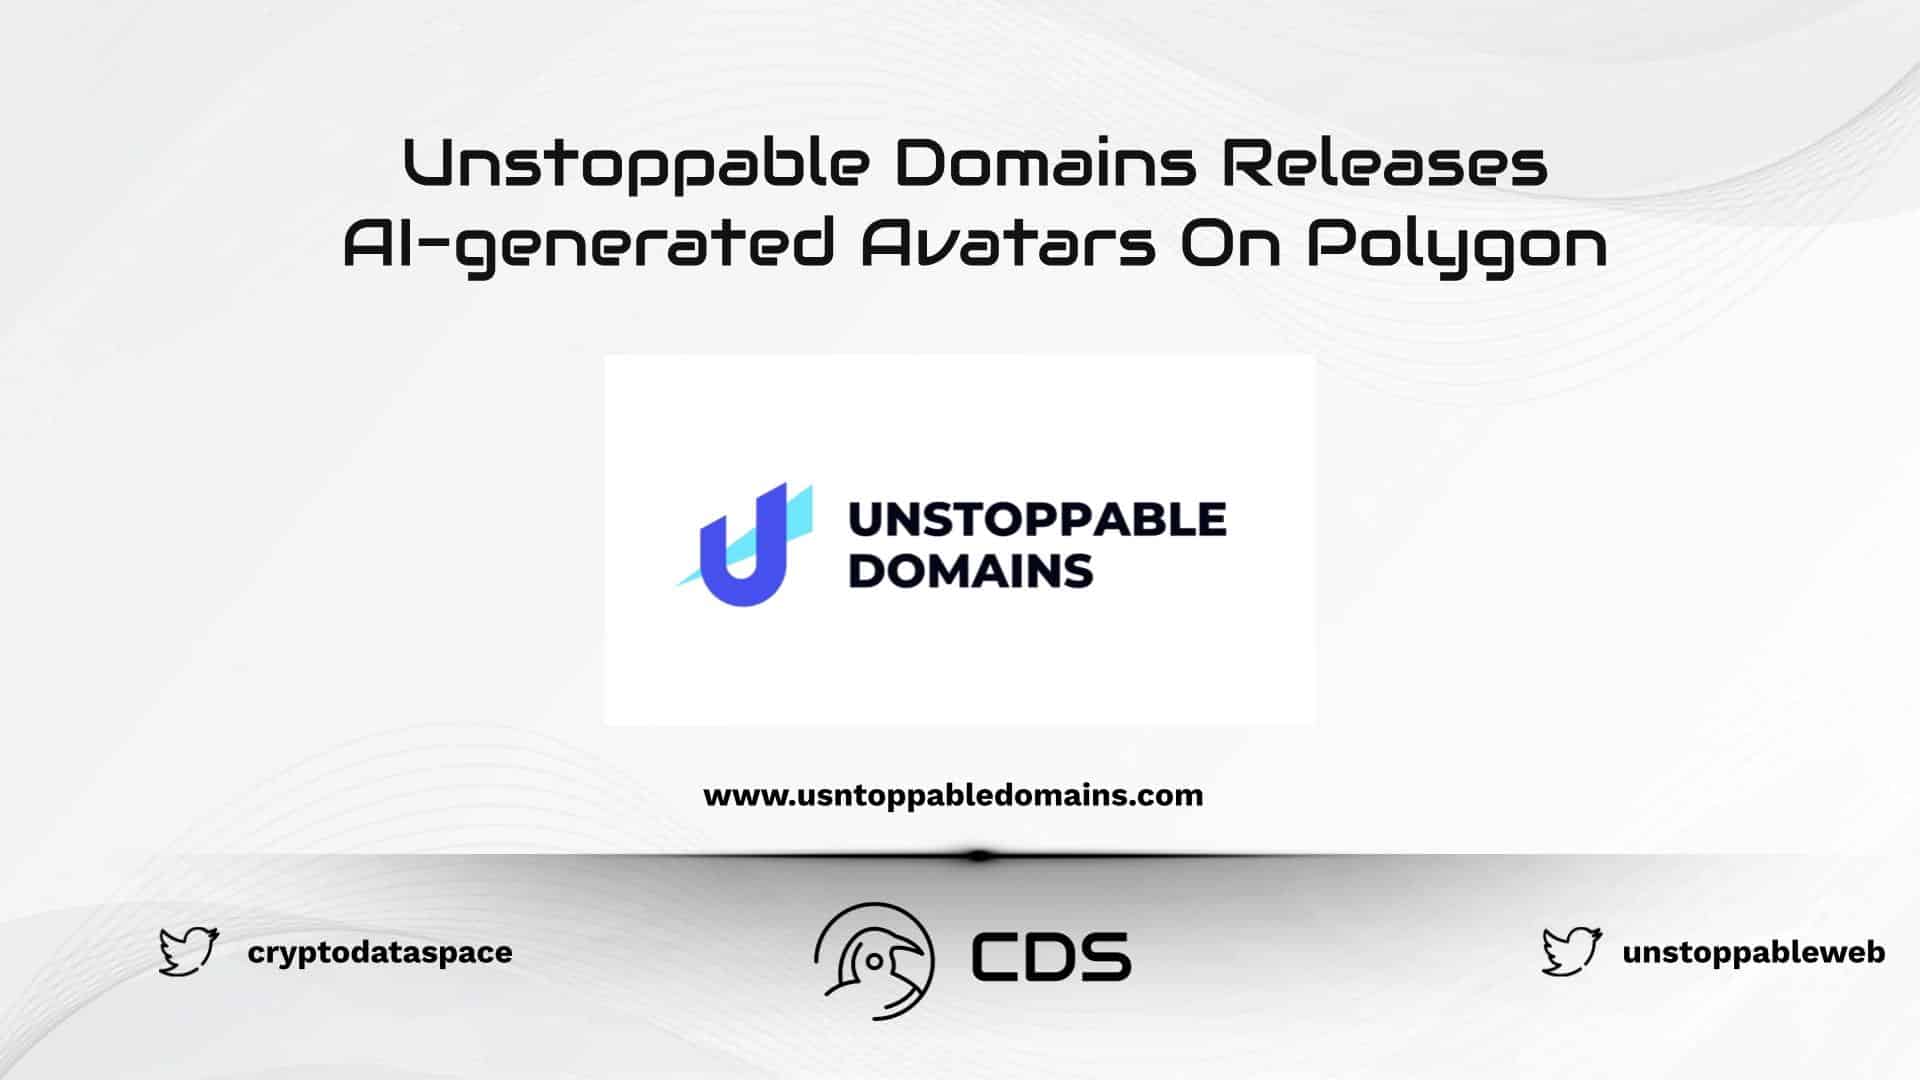 Unstoppable Domains Releases AI-generated Avatars On Polygon